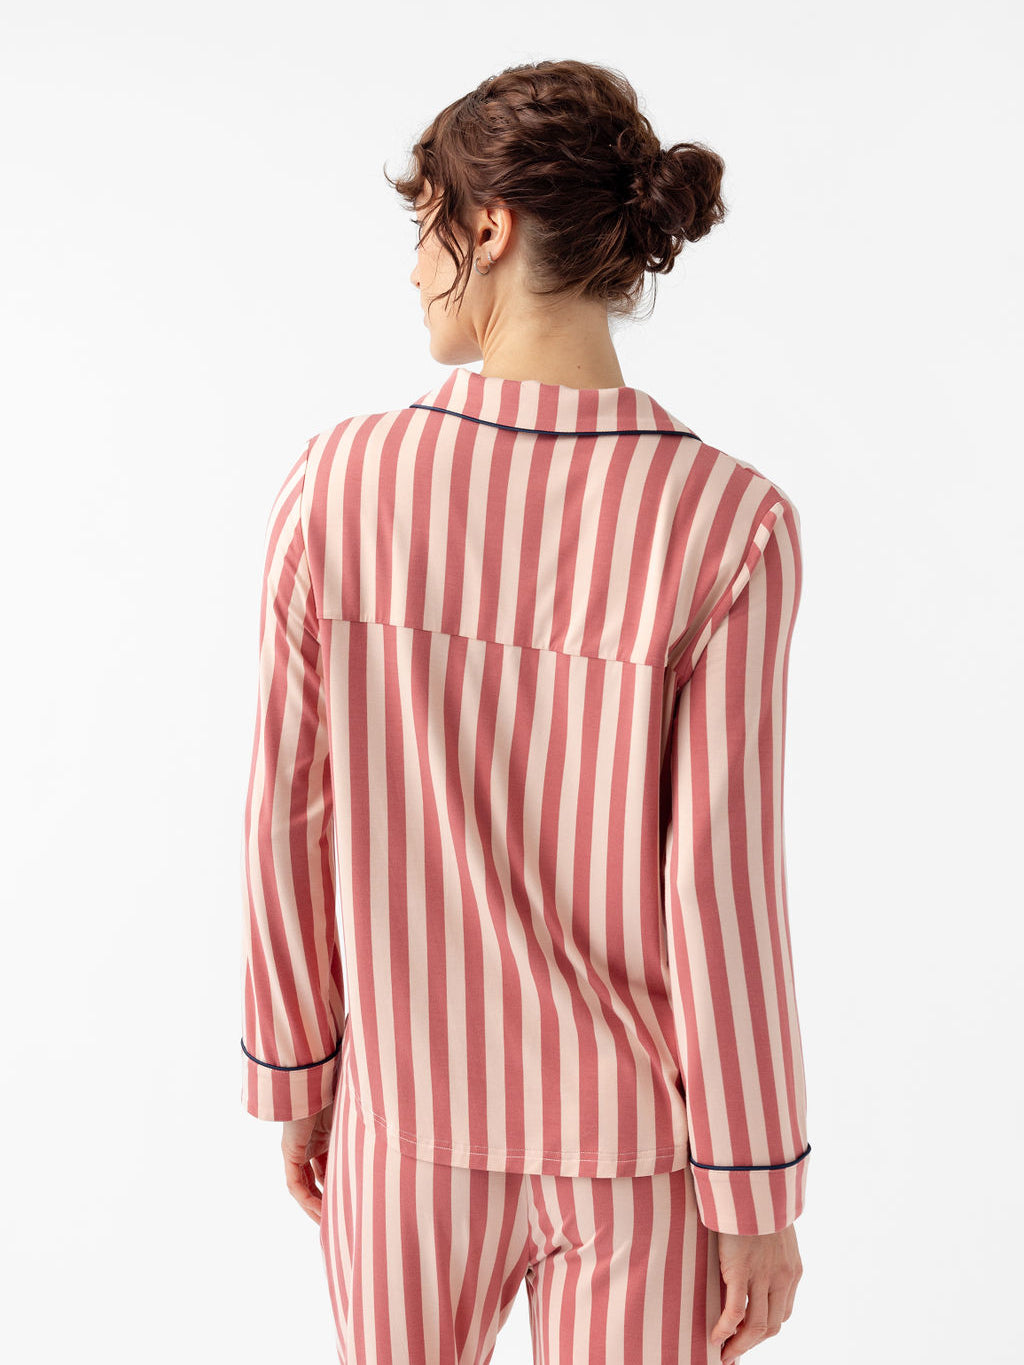 Back of woman wearing long sleeve blush stripe pajama top with white background 